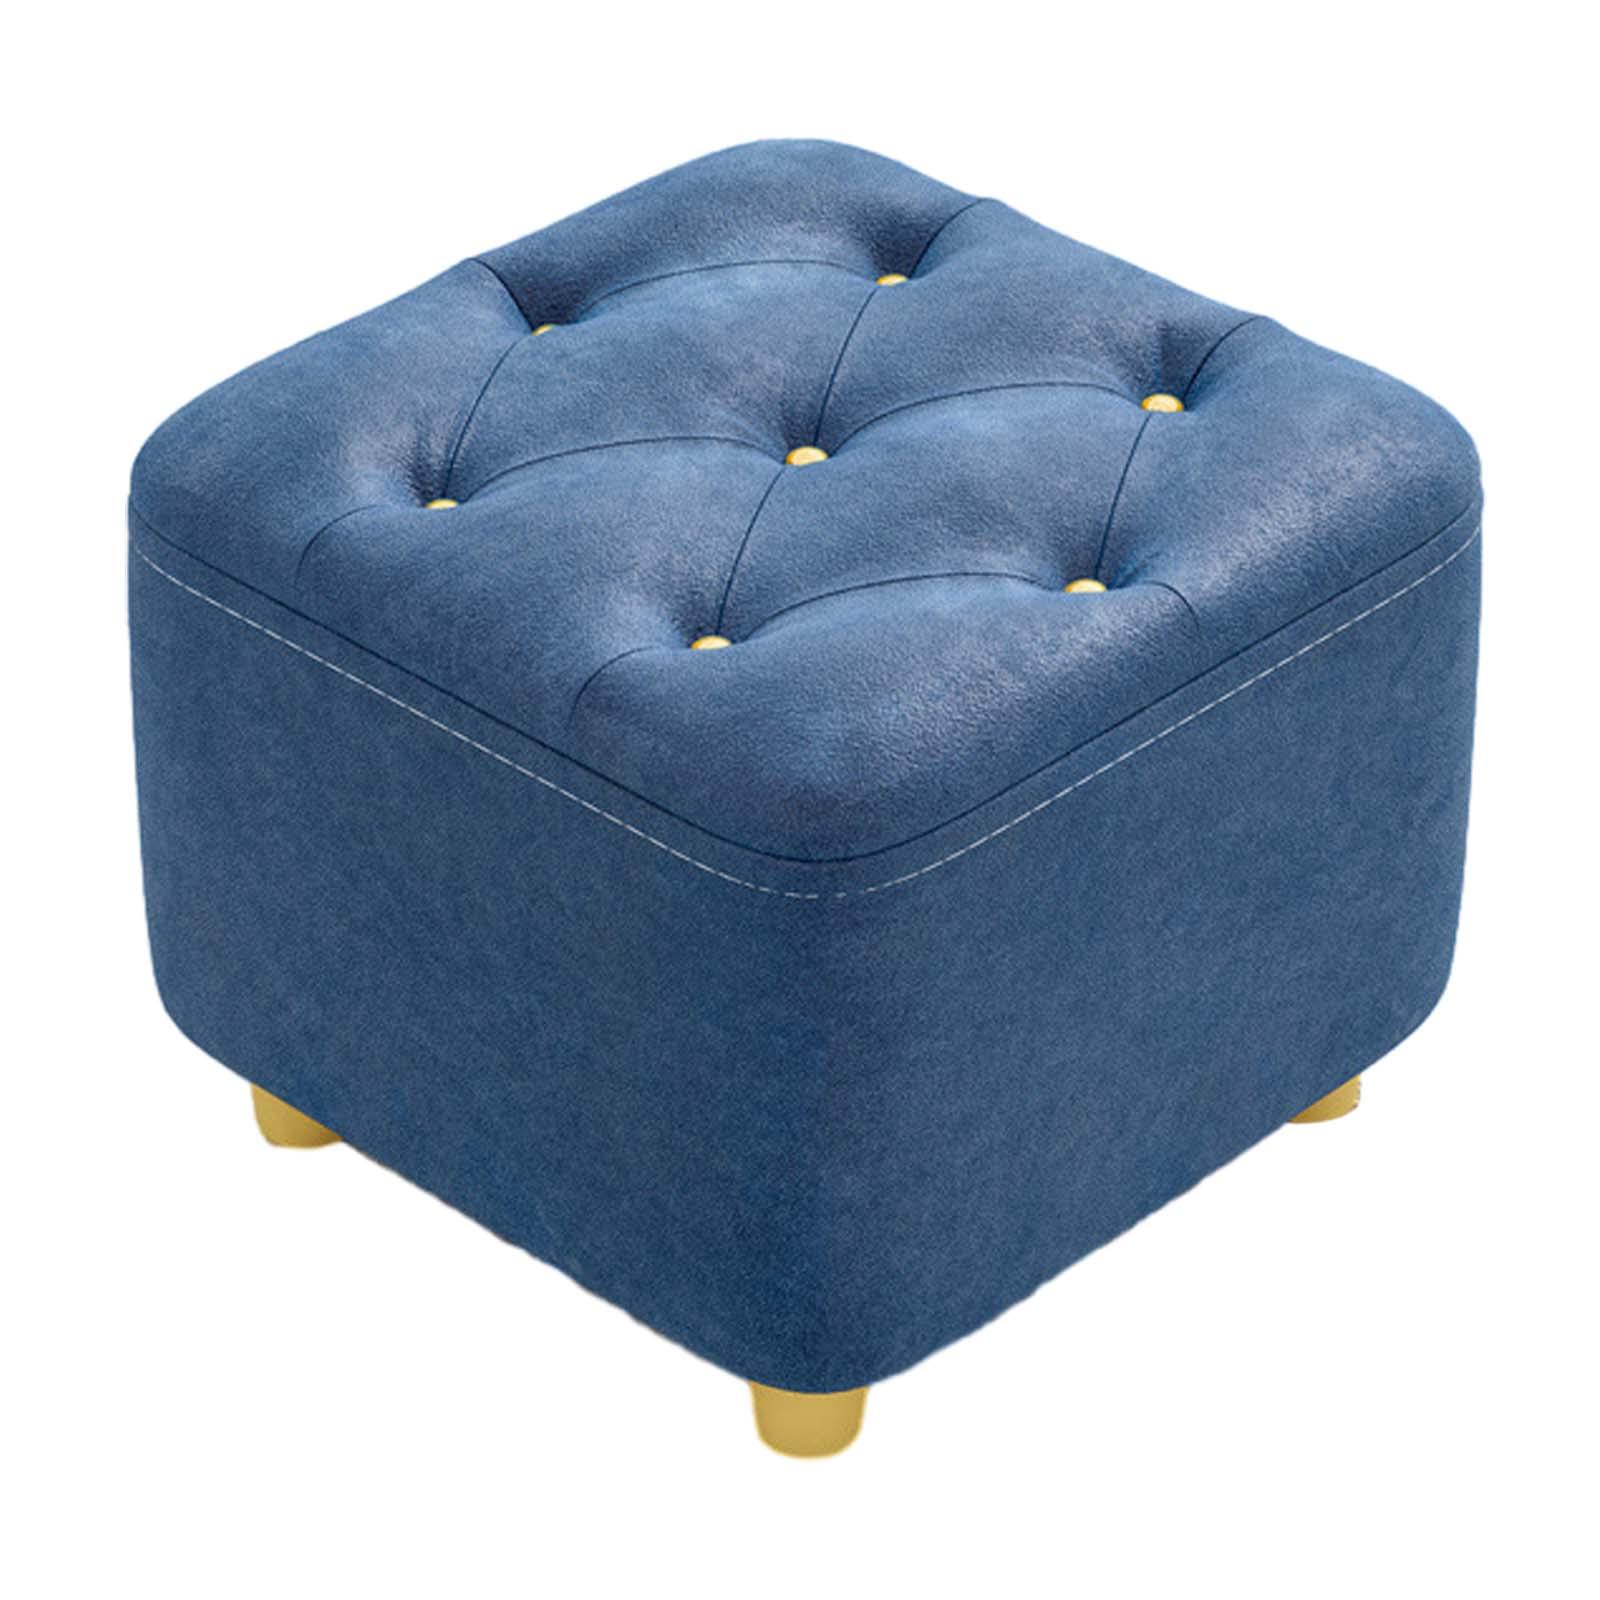 Square Footstool Foot Stool Comfortable Stepstool Creative Ottoman Stool Footrest for Living Room Dressing Room Bedroom Couch dark blue - image 1 of 8